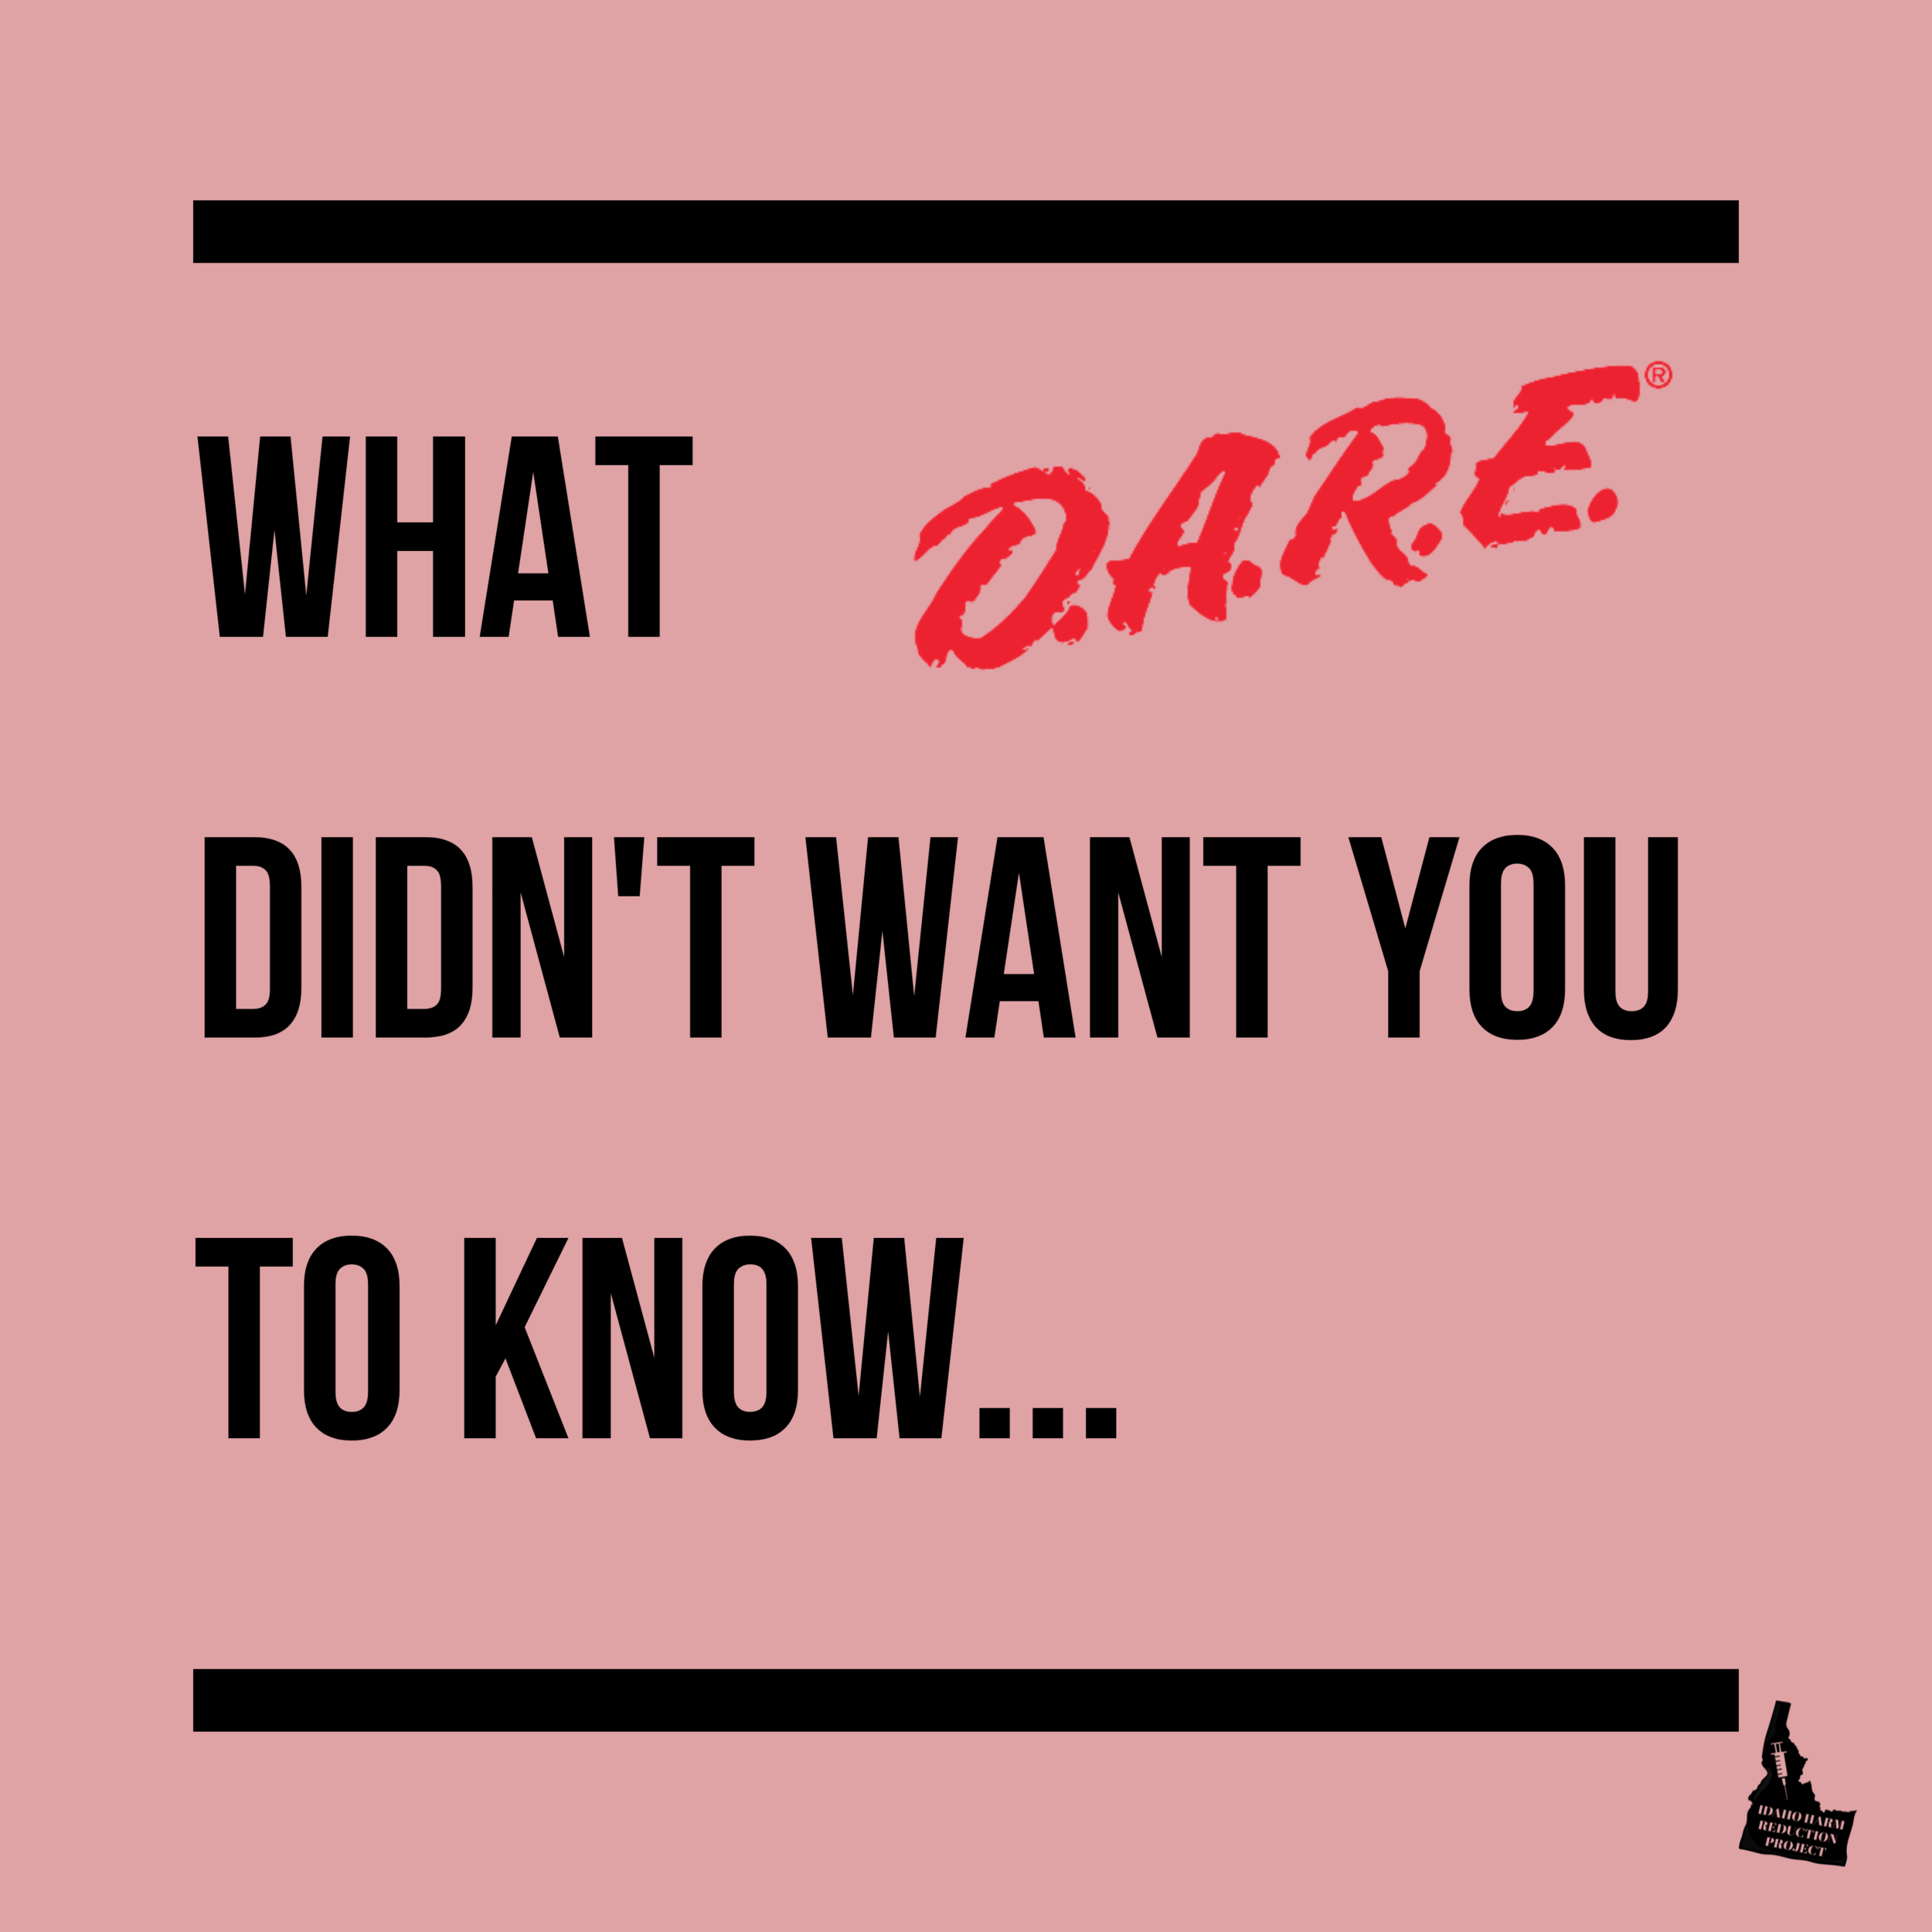 DARE_001.png